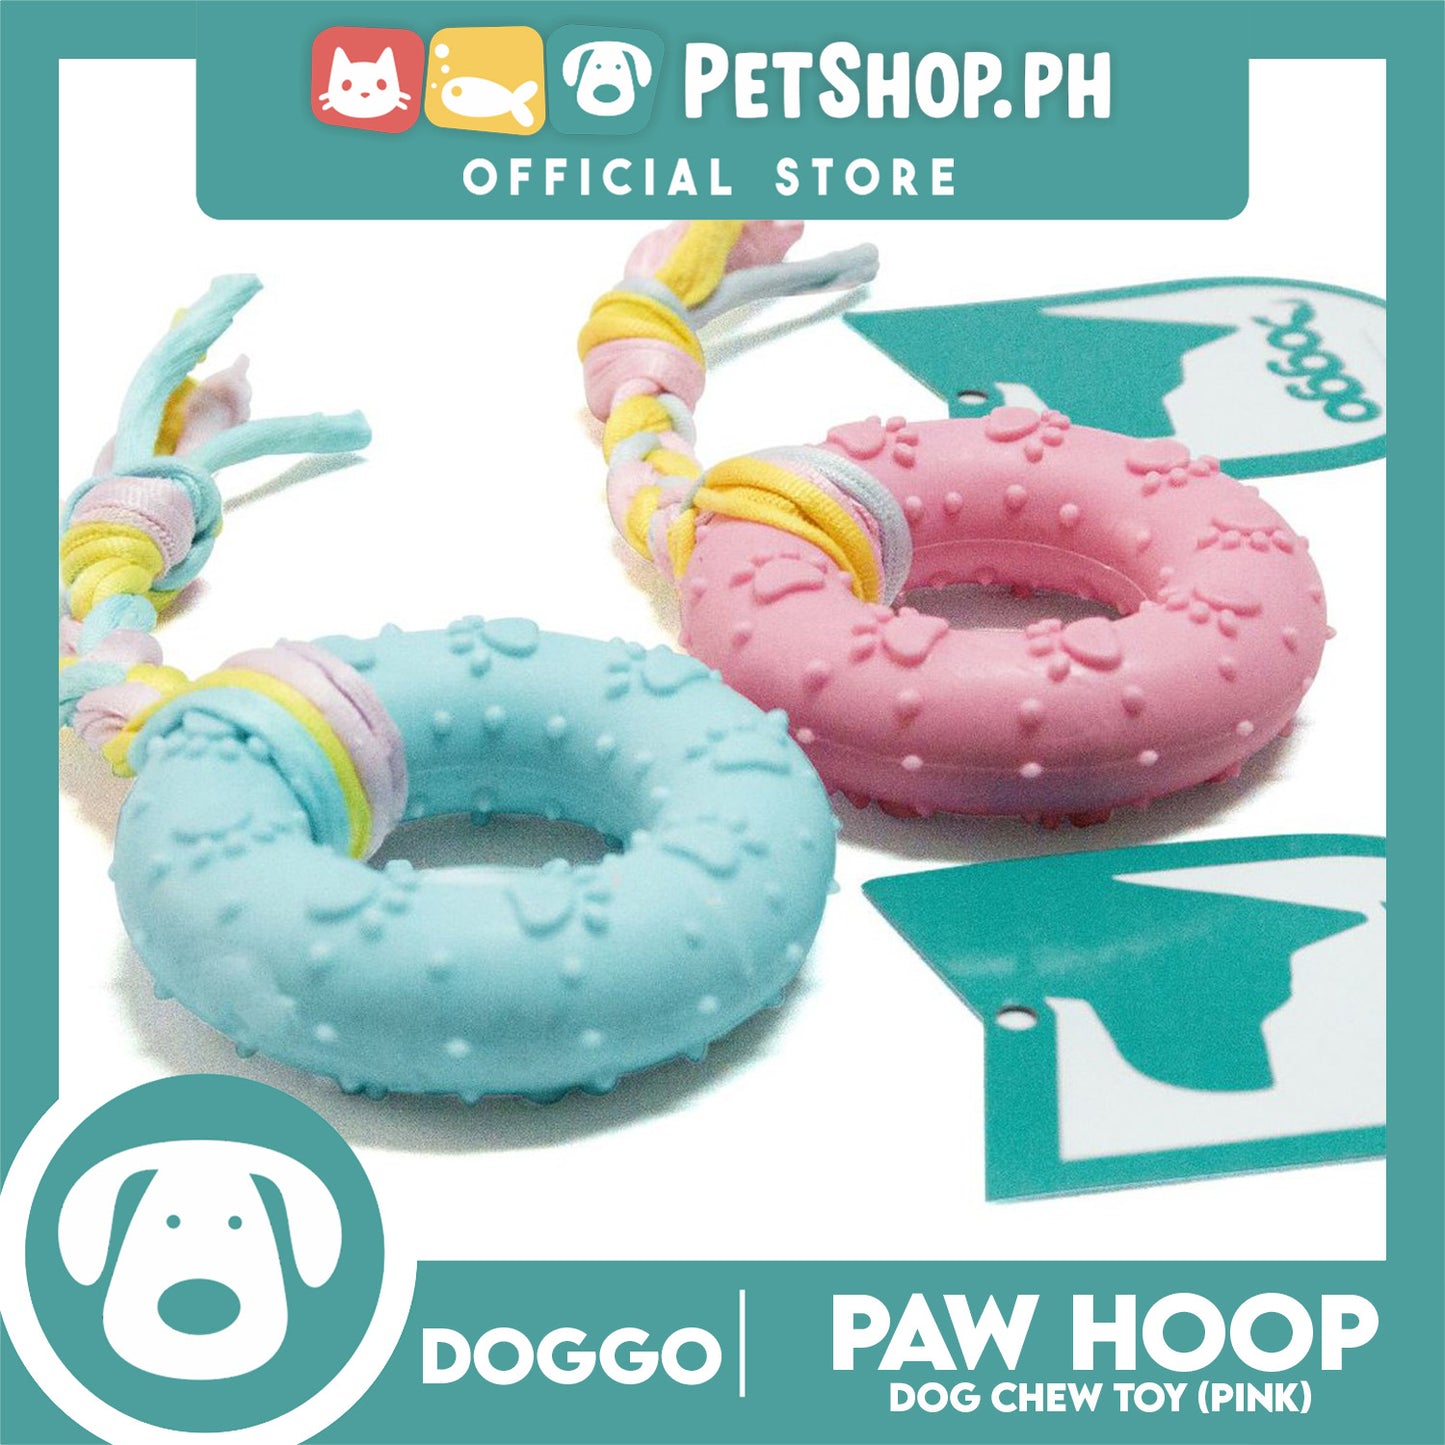 Doggo Paw Hoop (Pink) Toy for Dog